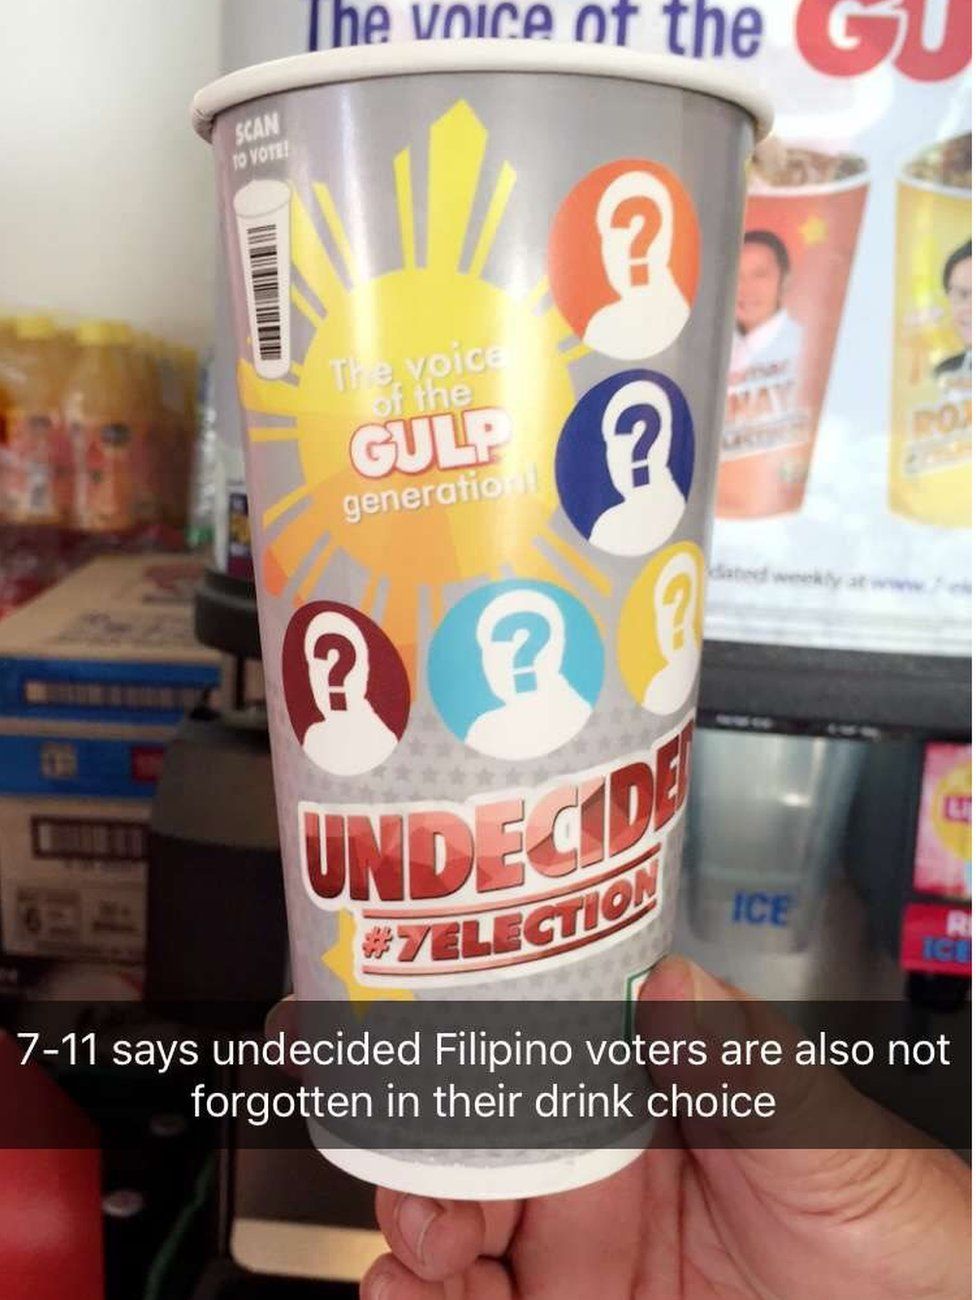 Snapchat picture of the "undecided" grey cup, with text across it reading "7-11 says undecided Filipino voters are also not forgotten in their drink choice"